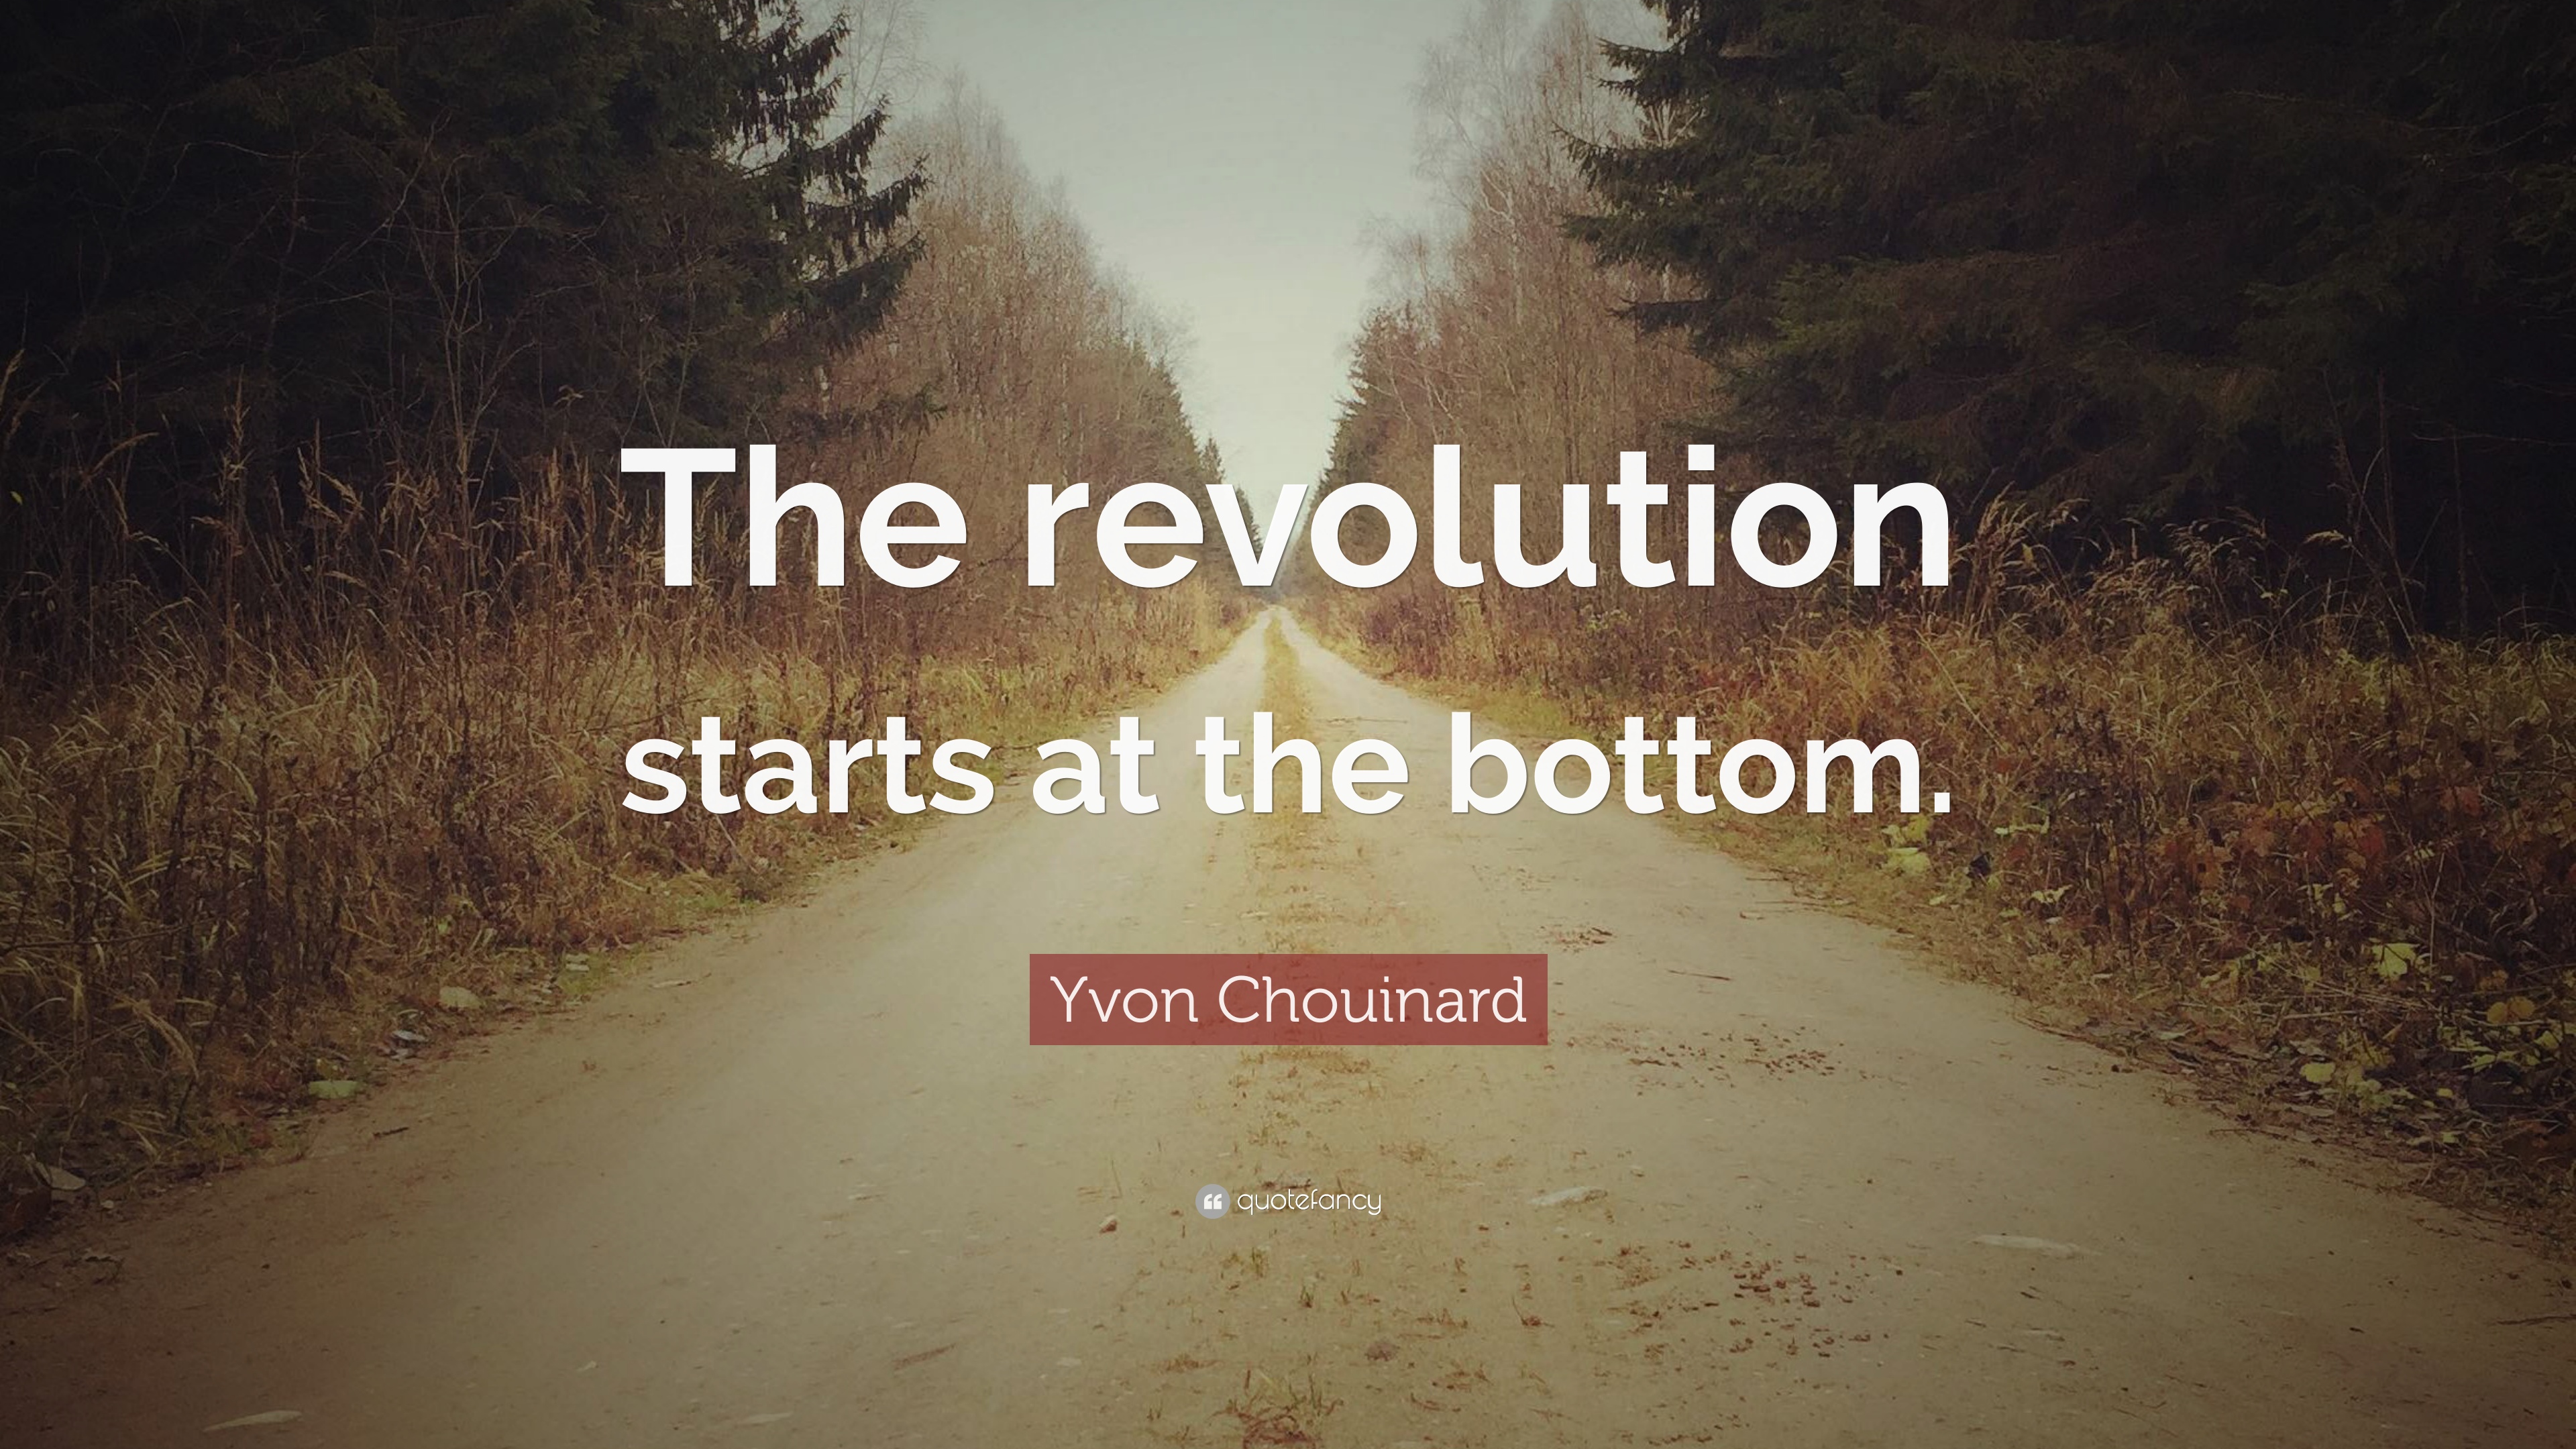 Patagonia Founder, Yvon Chouinard believes in the power of regenerative agriculture.